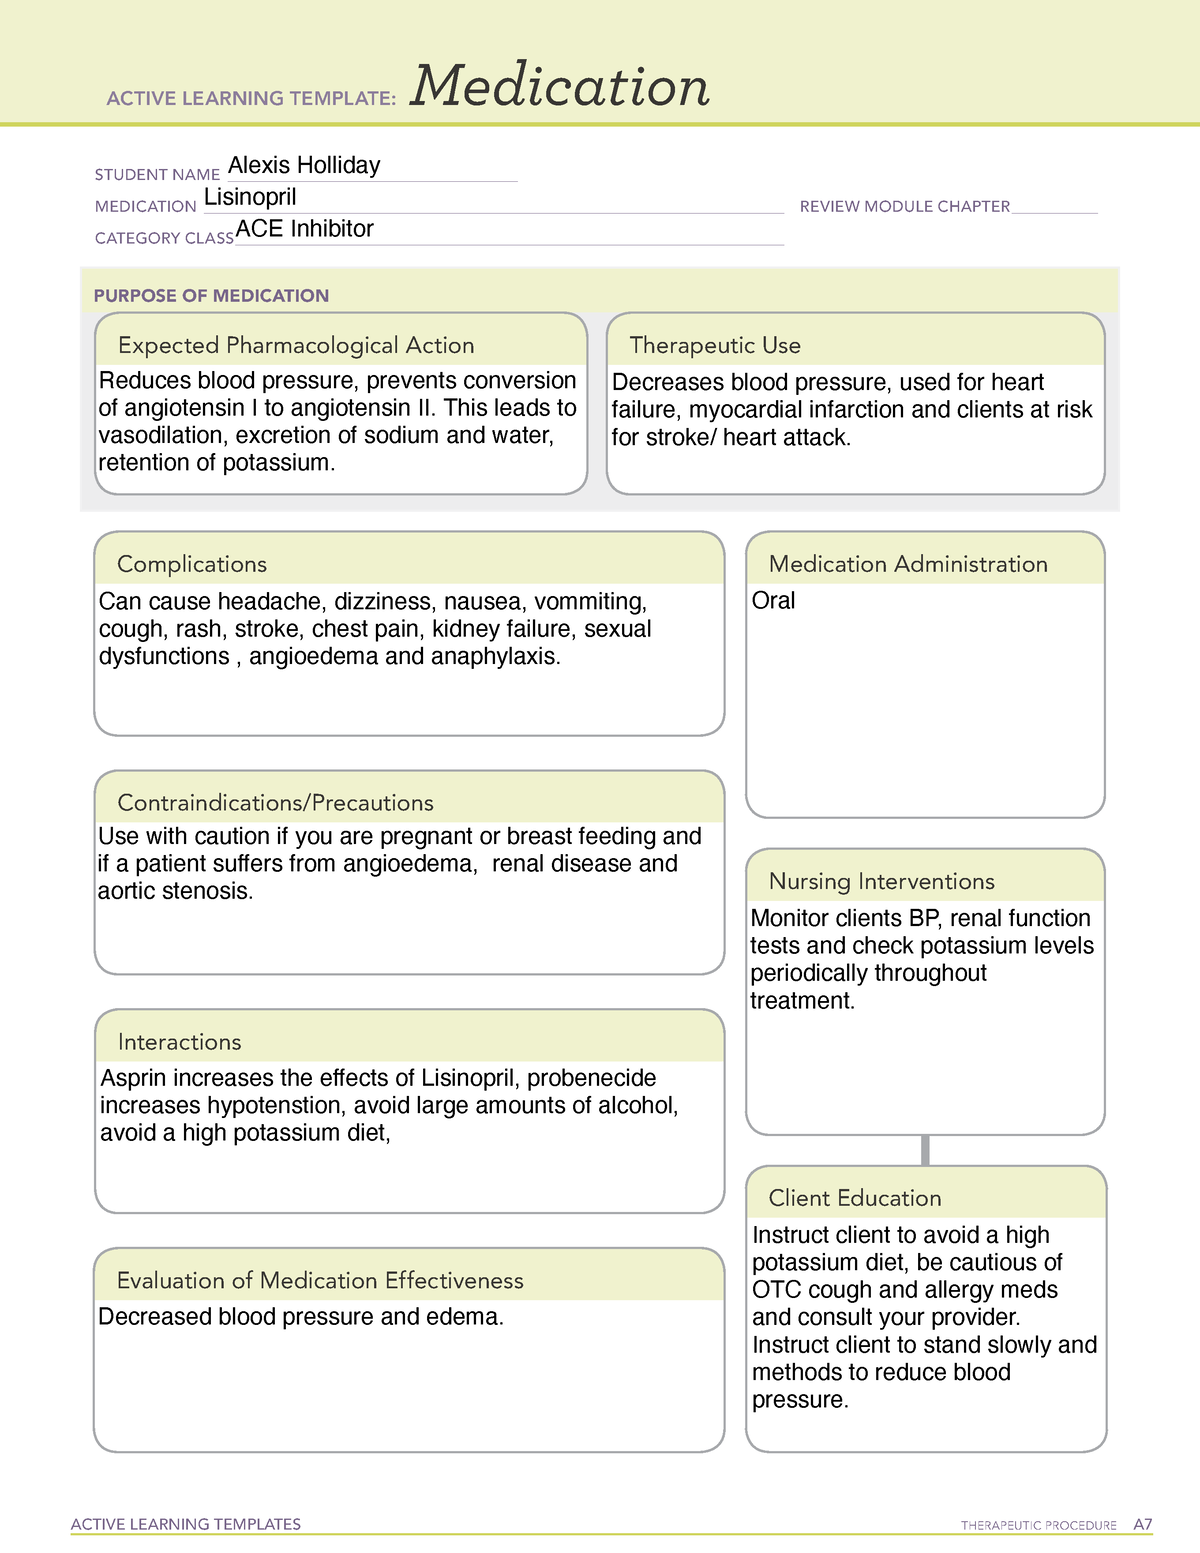 Med Template Lisinopril ACTIVE LEARNING TEMPLATES THERAPEUTIC PROCEDURE A Medication STUDENT